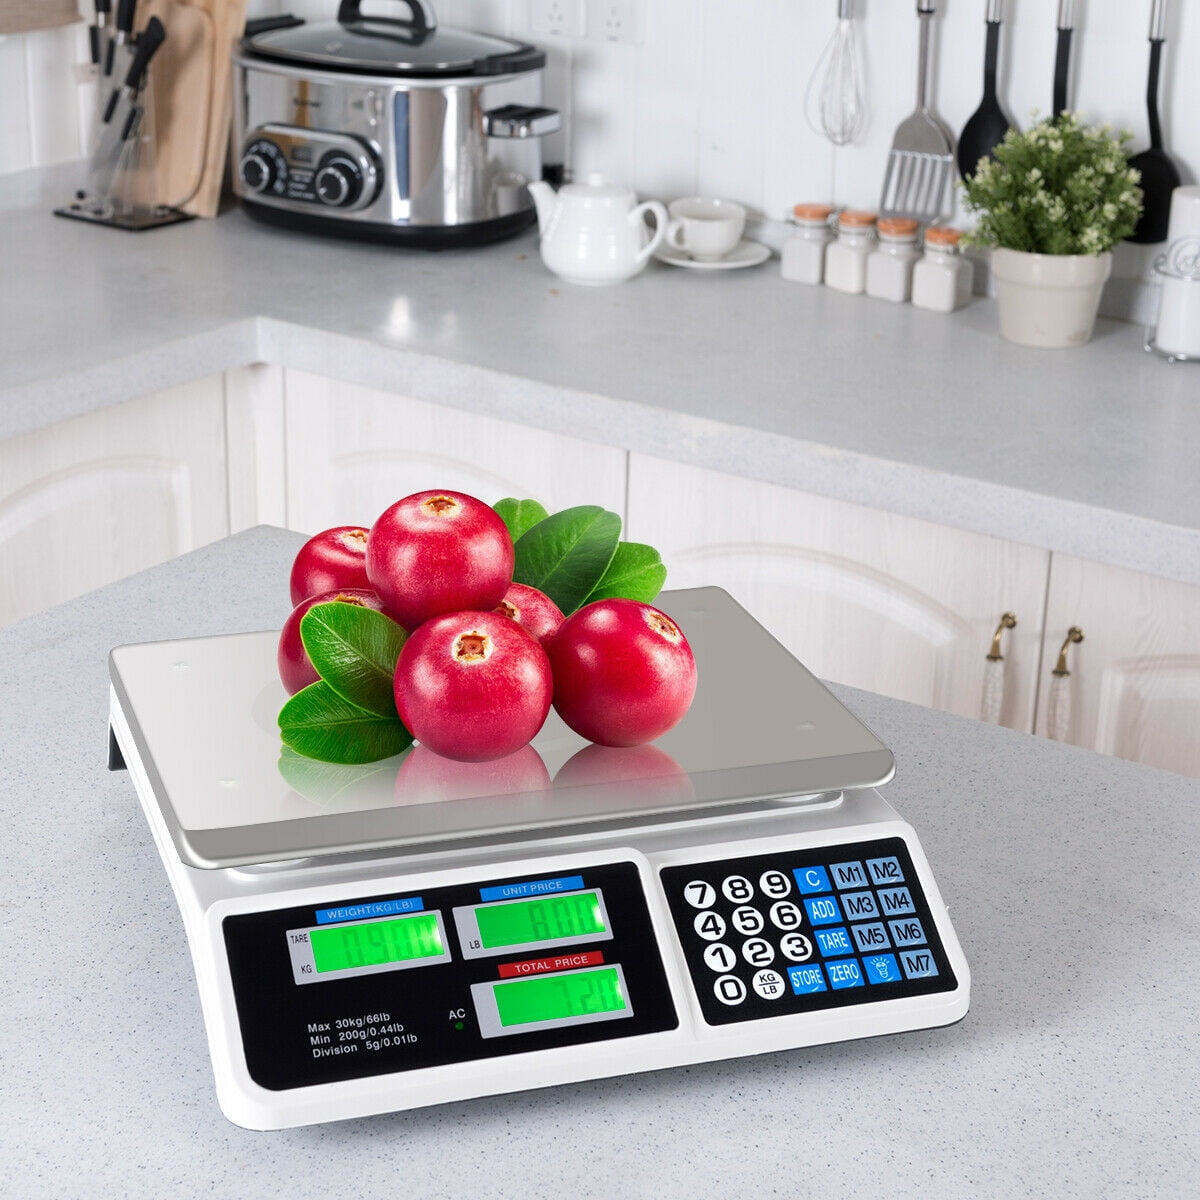 CB16658 66 lbs Weight Scale Digital Food Scales Count Scale, White & Black,  1 - Fred Meyer